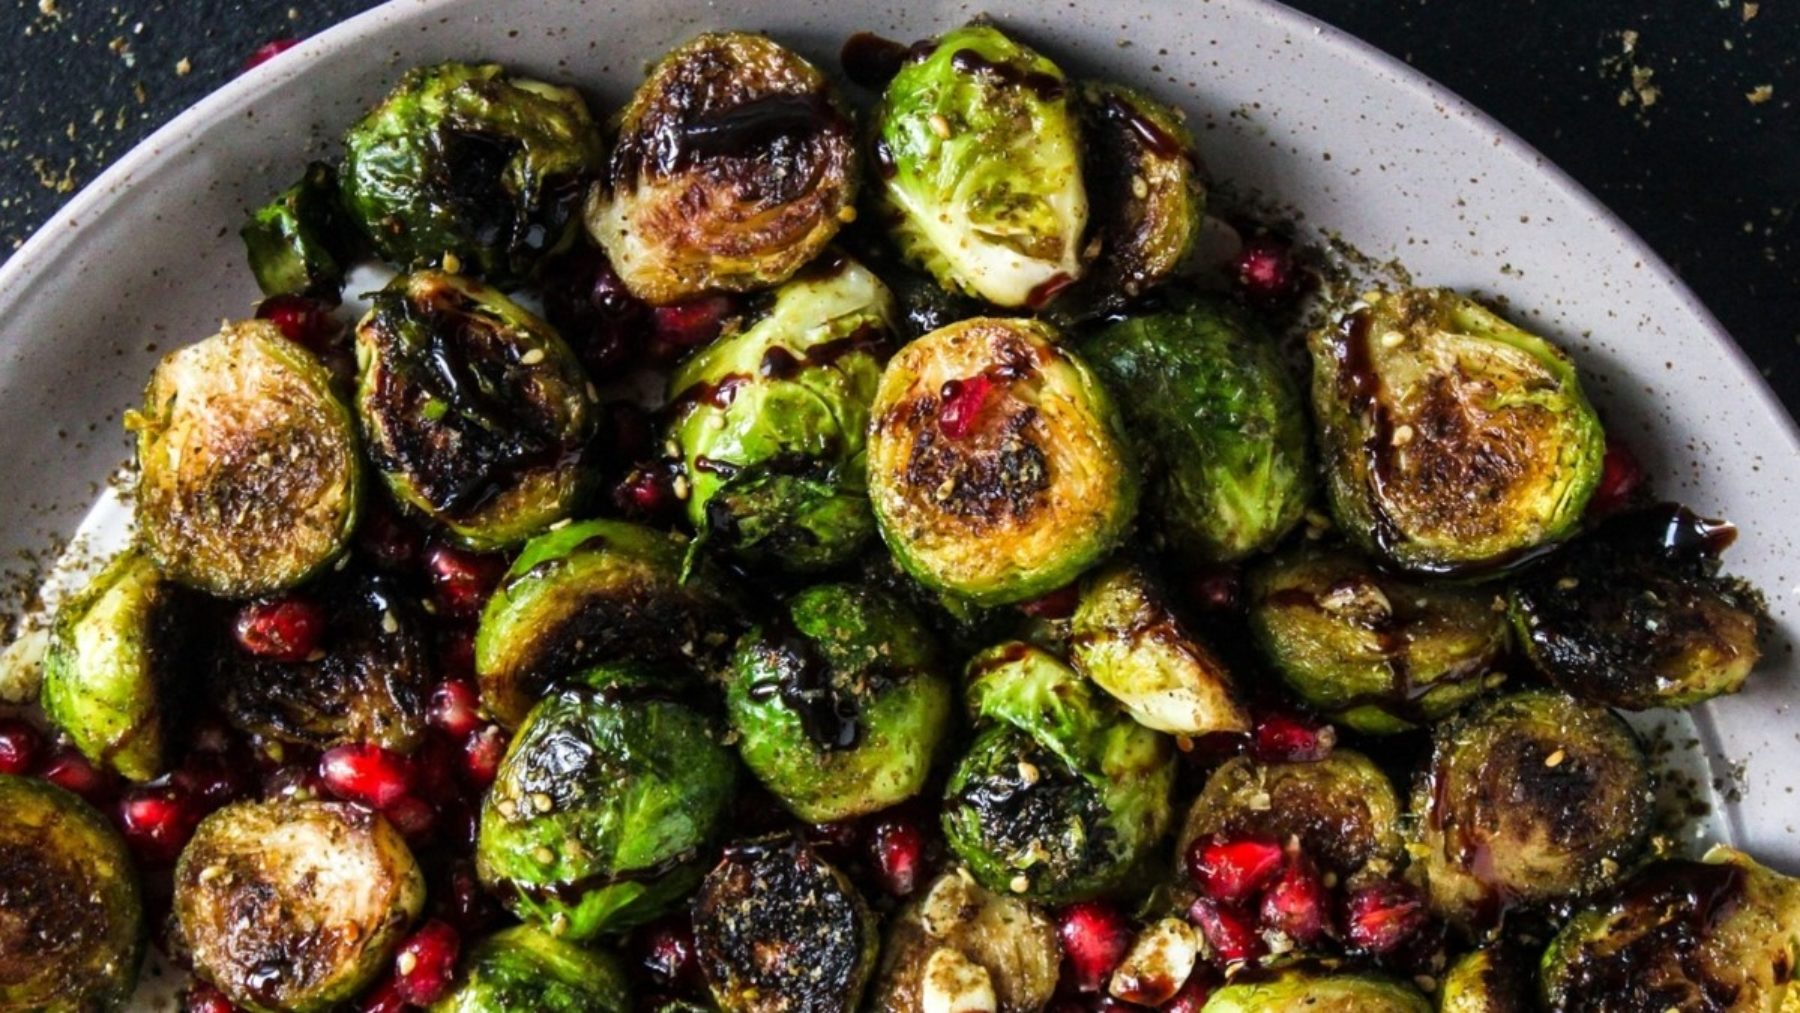 https://www.mondaycampaigns.org/wp-content/uploads/2021/09/meatless-monday-recipe-photo-charred-brussels-sprouts-feature-1800x0-c-default.jpeg